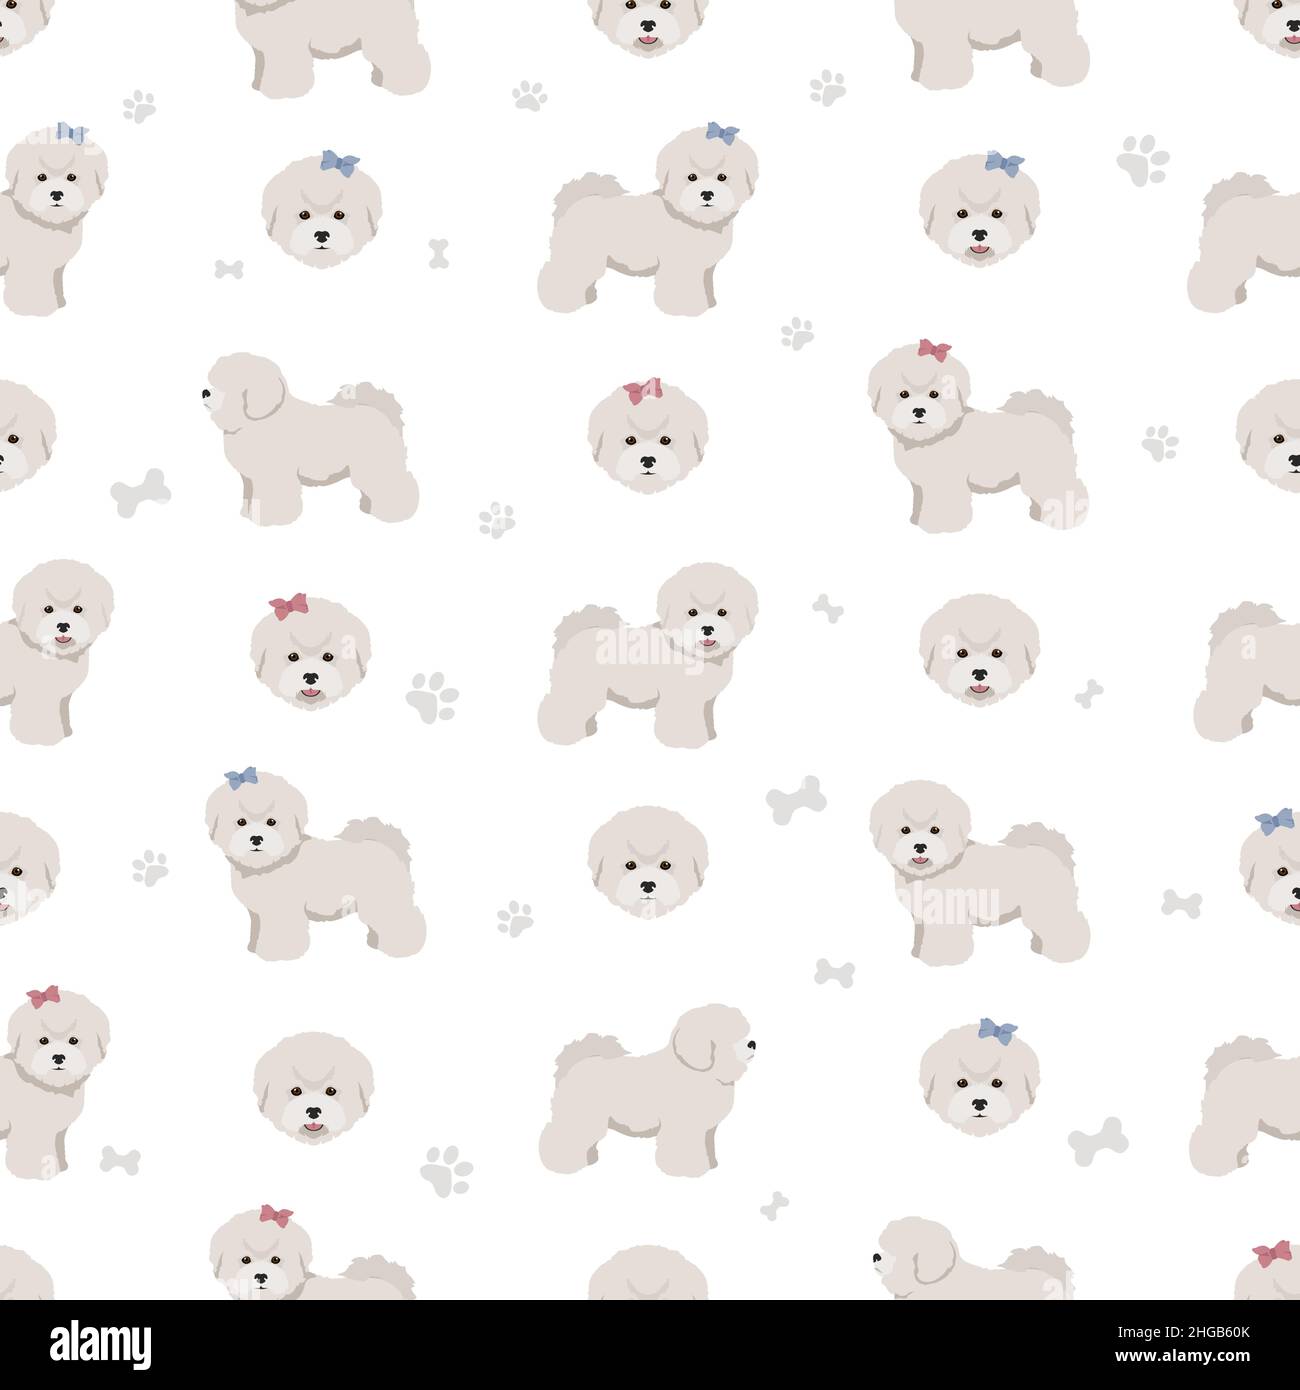 Bichon frise Teacup seamless pattern. Different coat colors and poses set.  Vector illustration Stock Vector